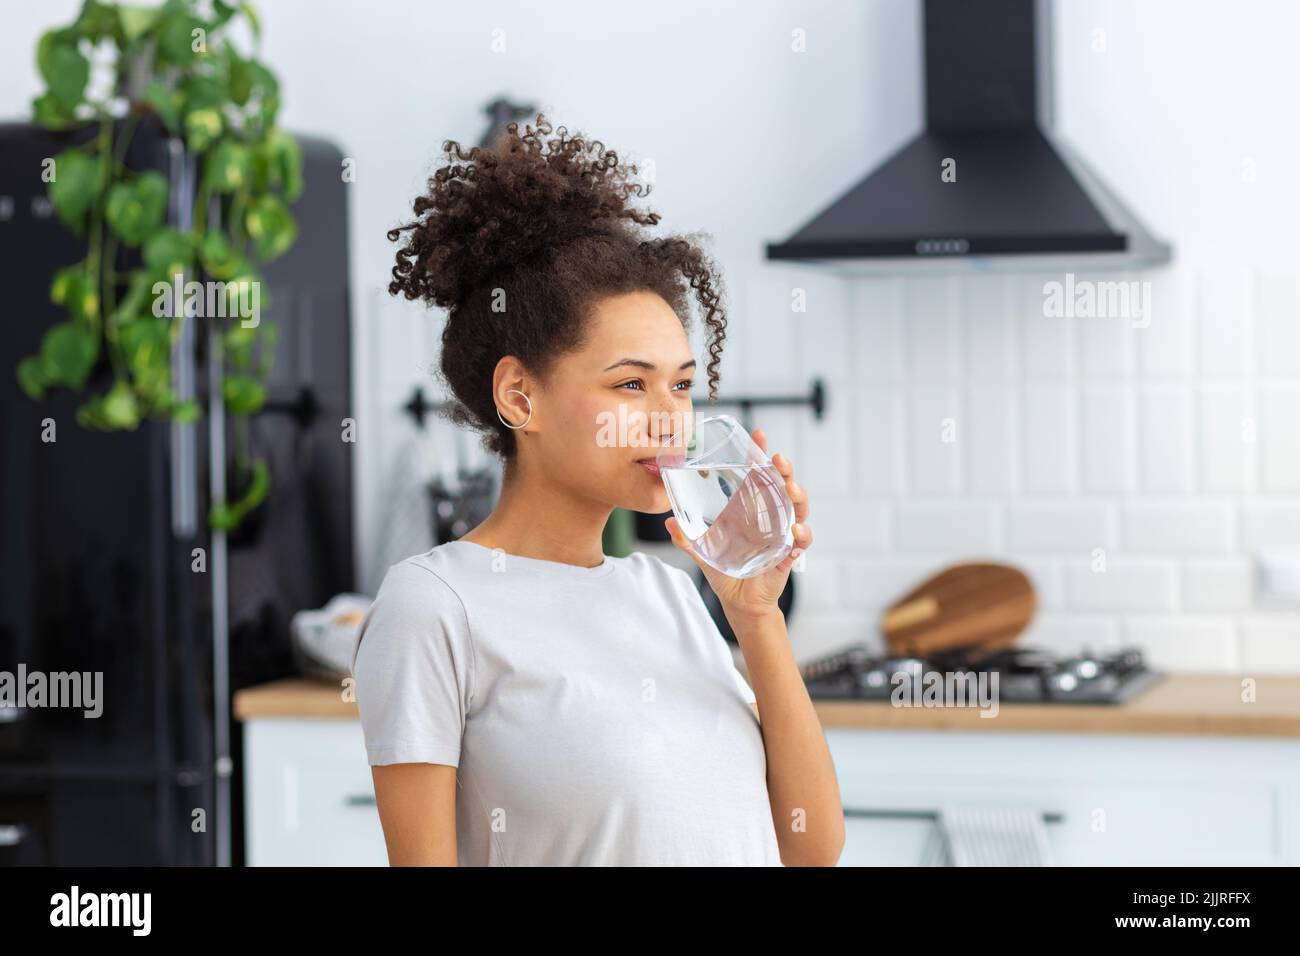 Healthy lifestyle concept. Beautiful woman drinking clean water Stock Photo